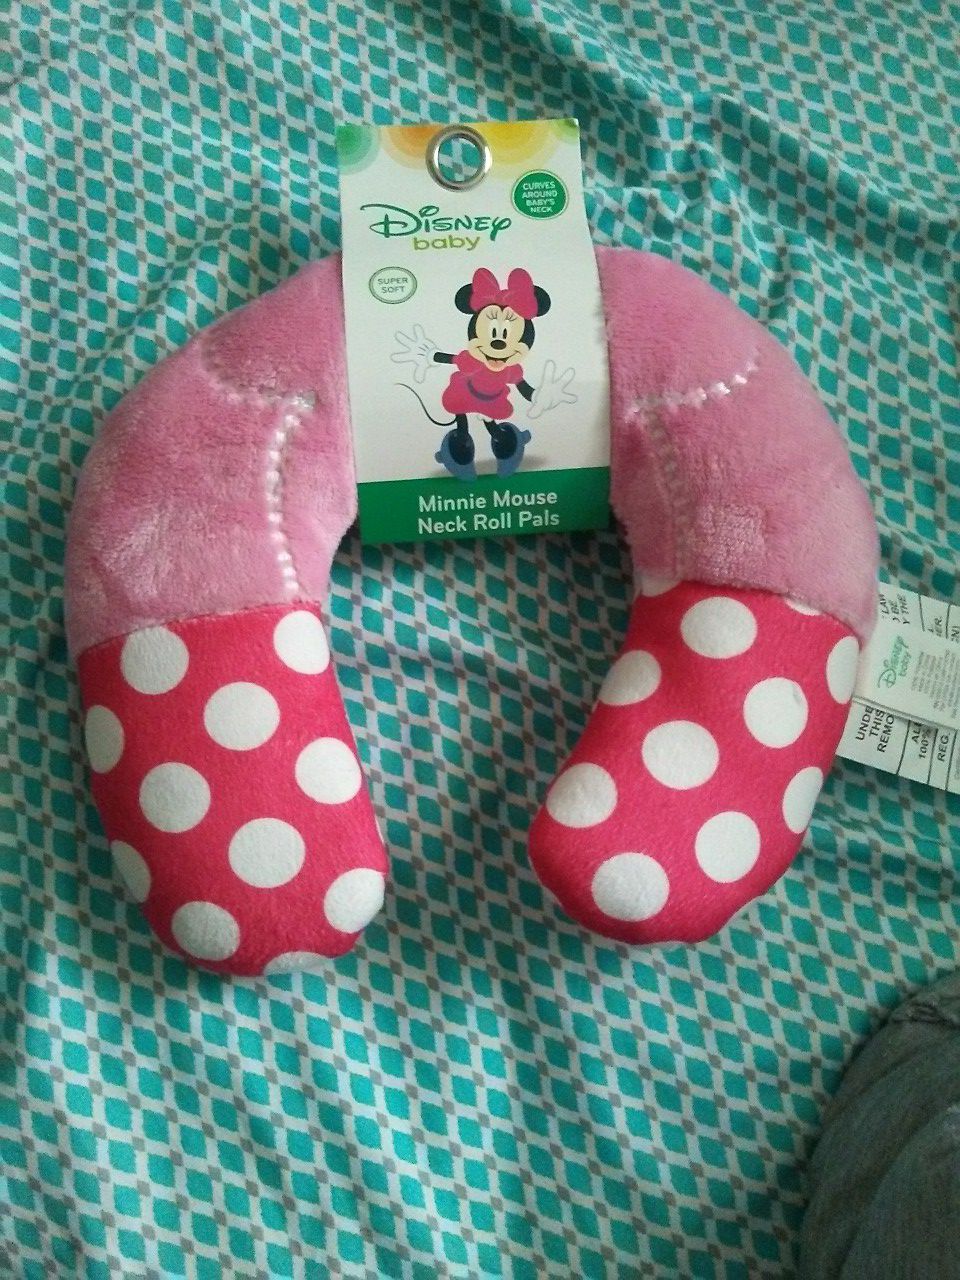 Minnie mouse neck pad